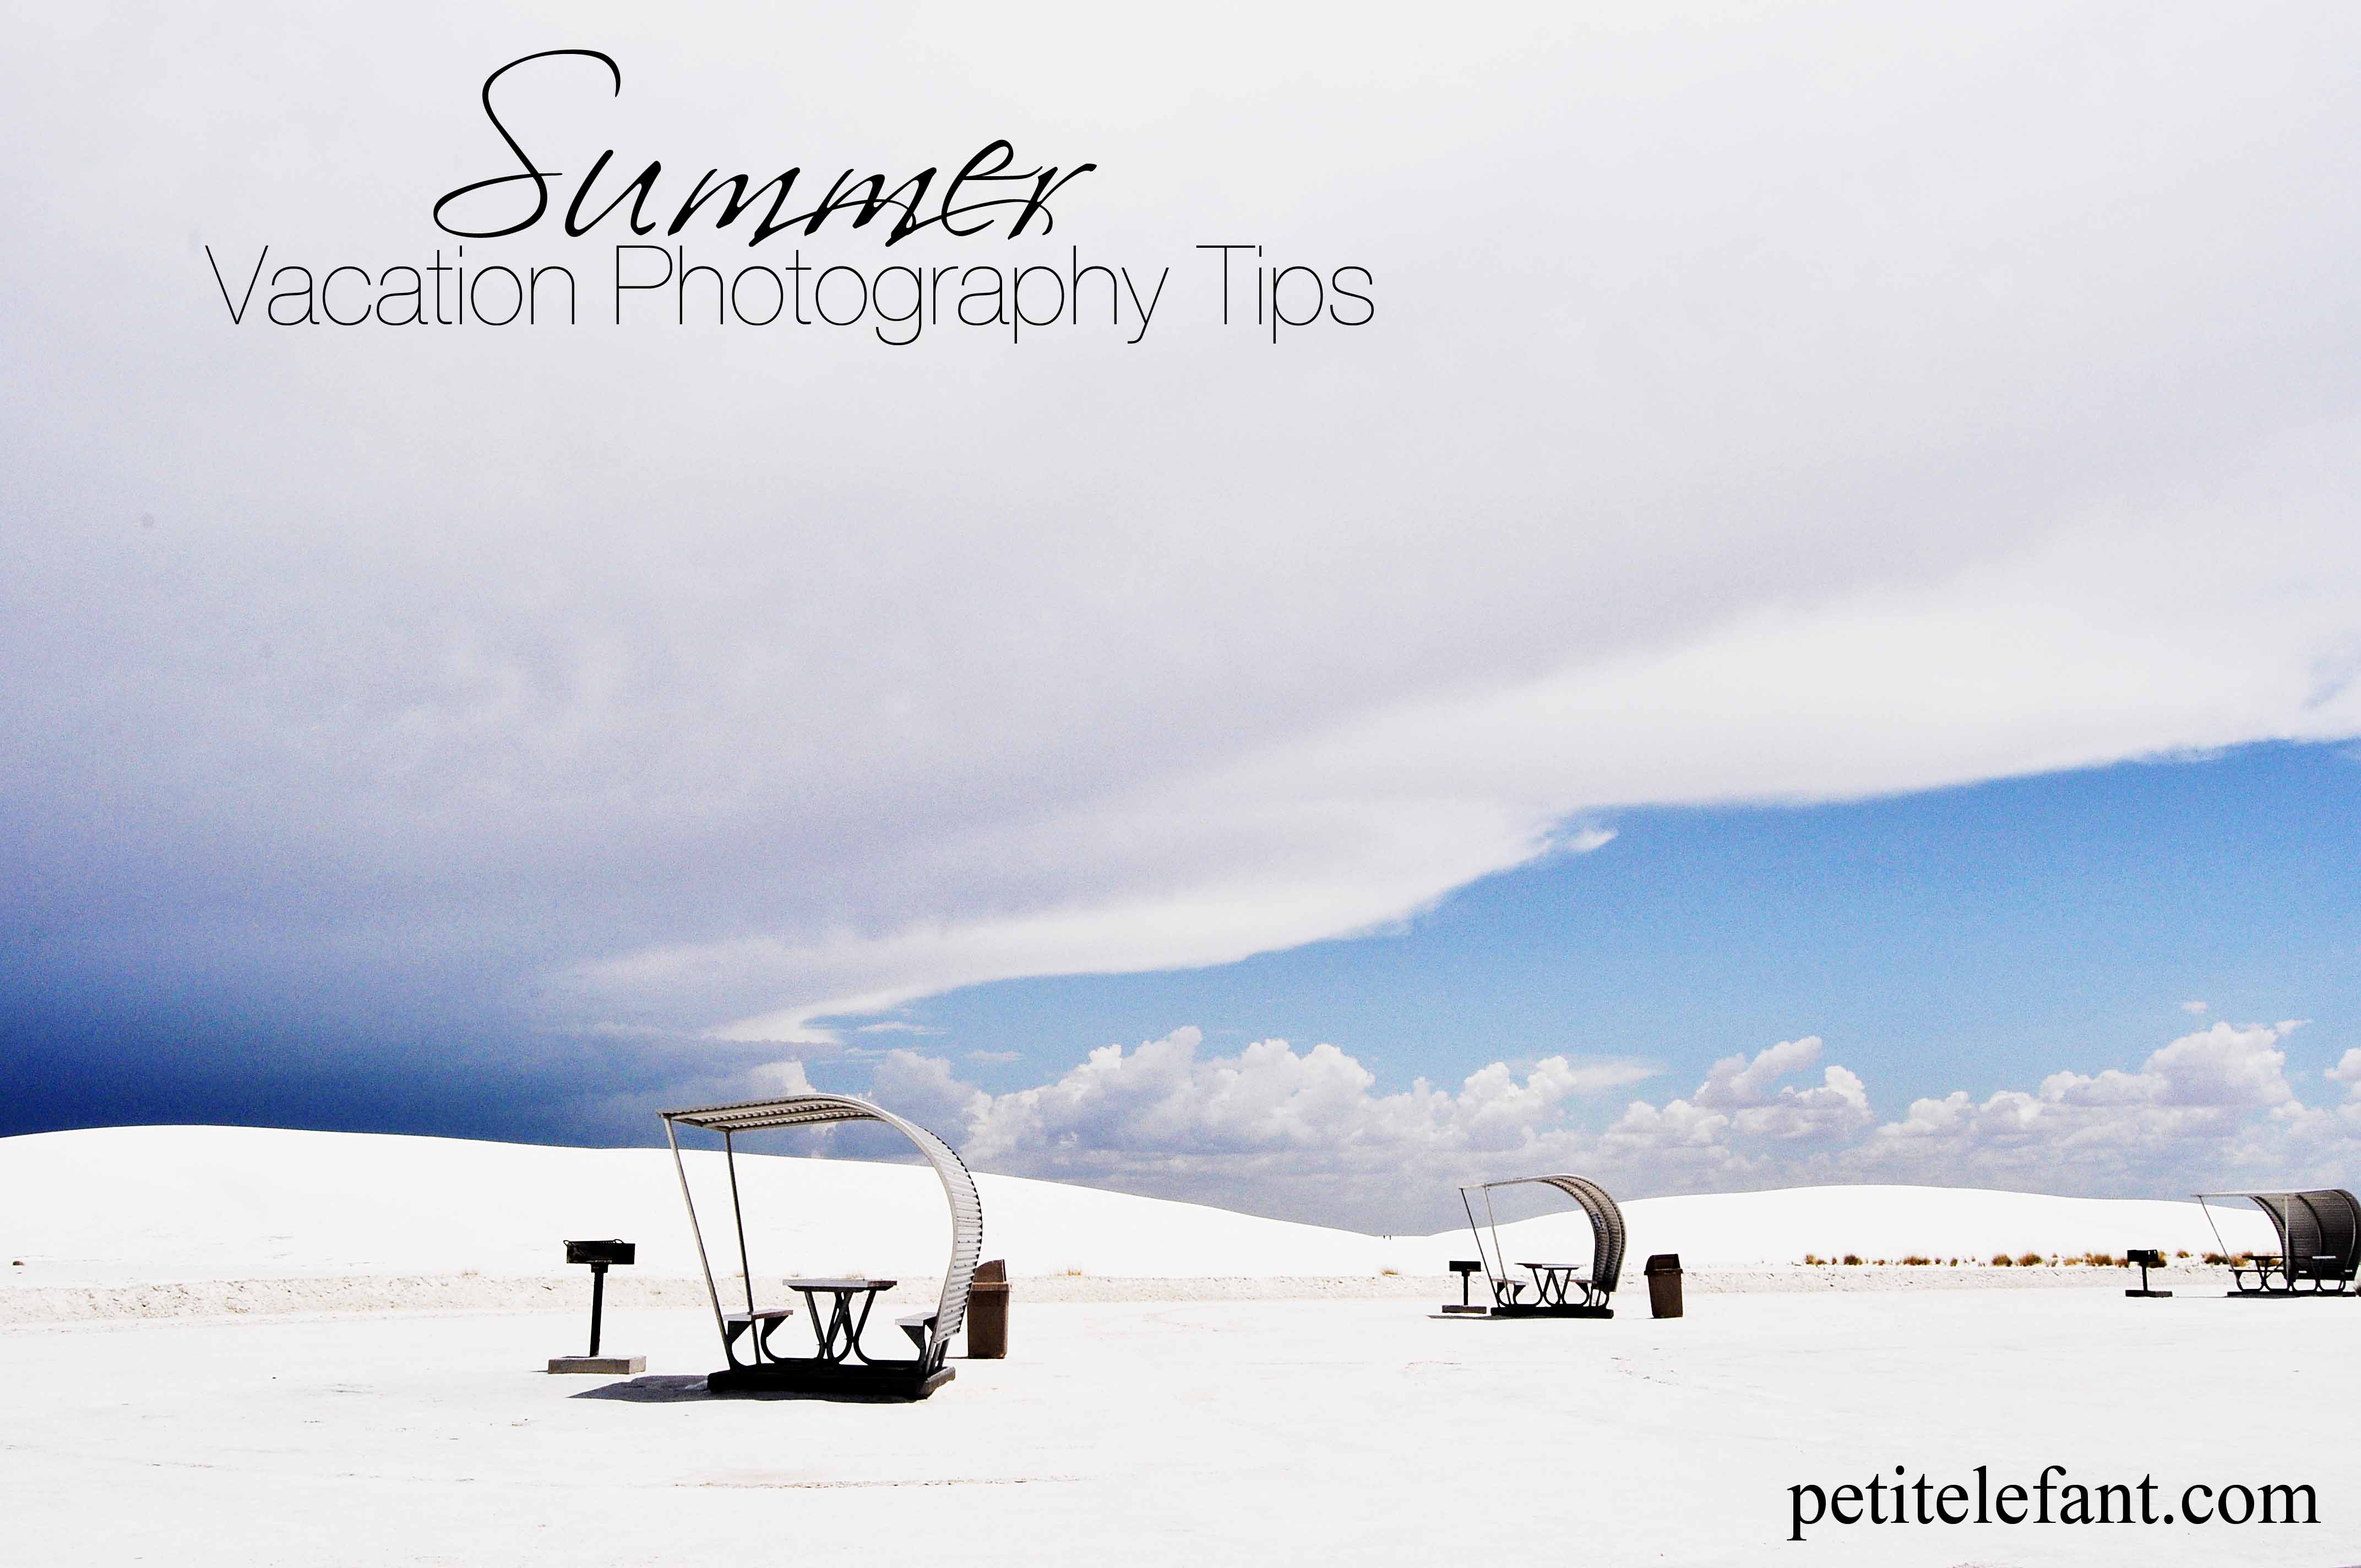 Summer Vacation Photography Tips